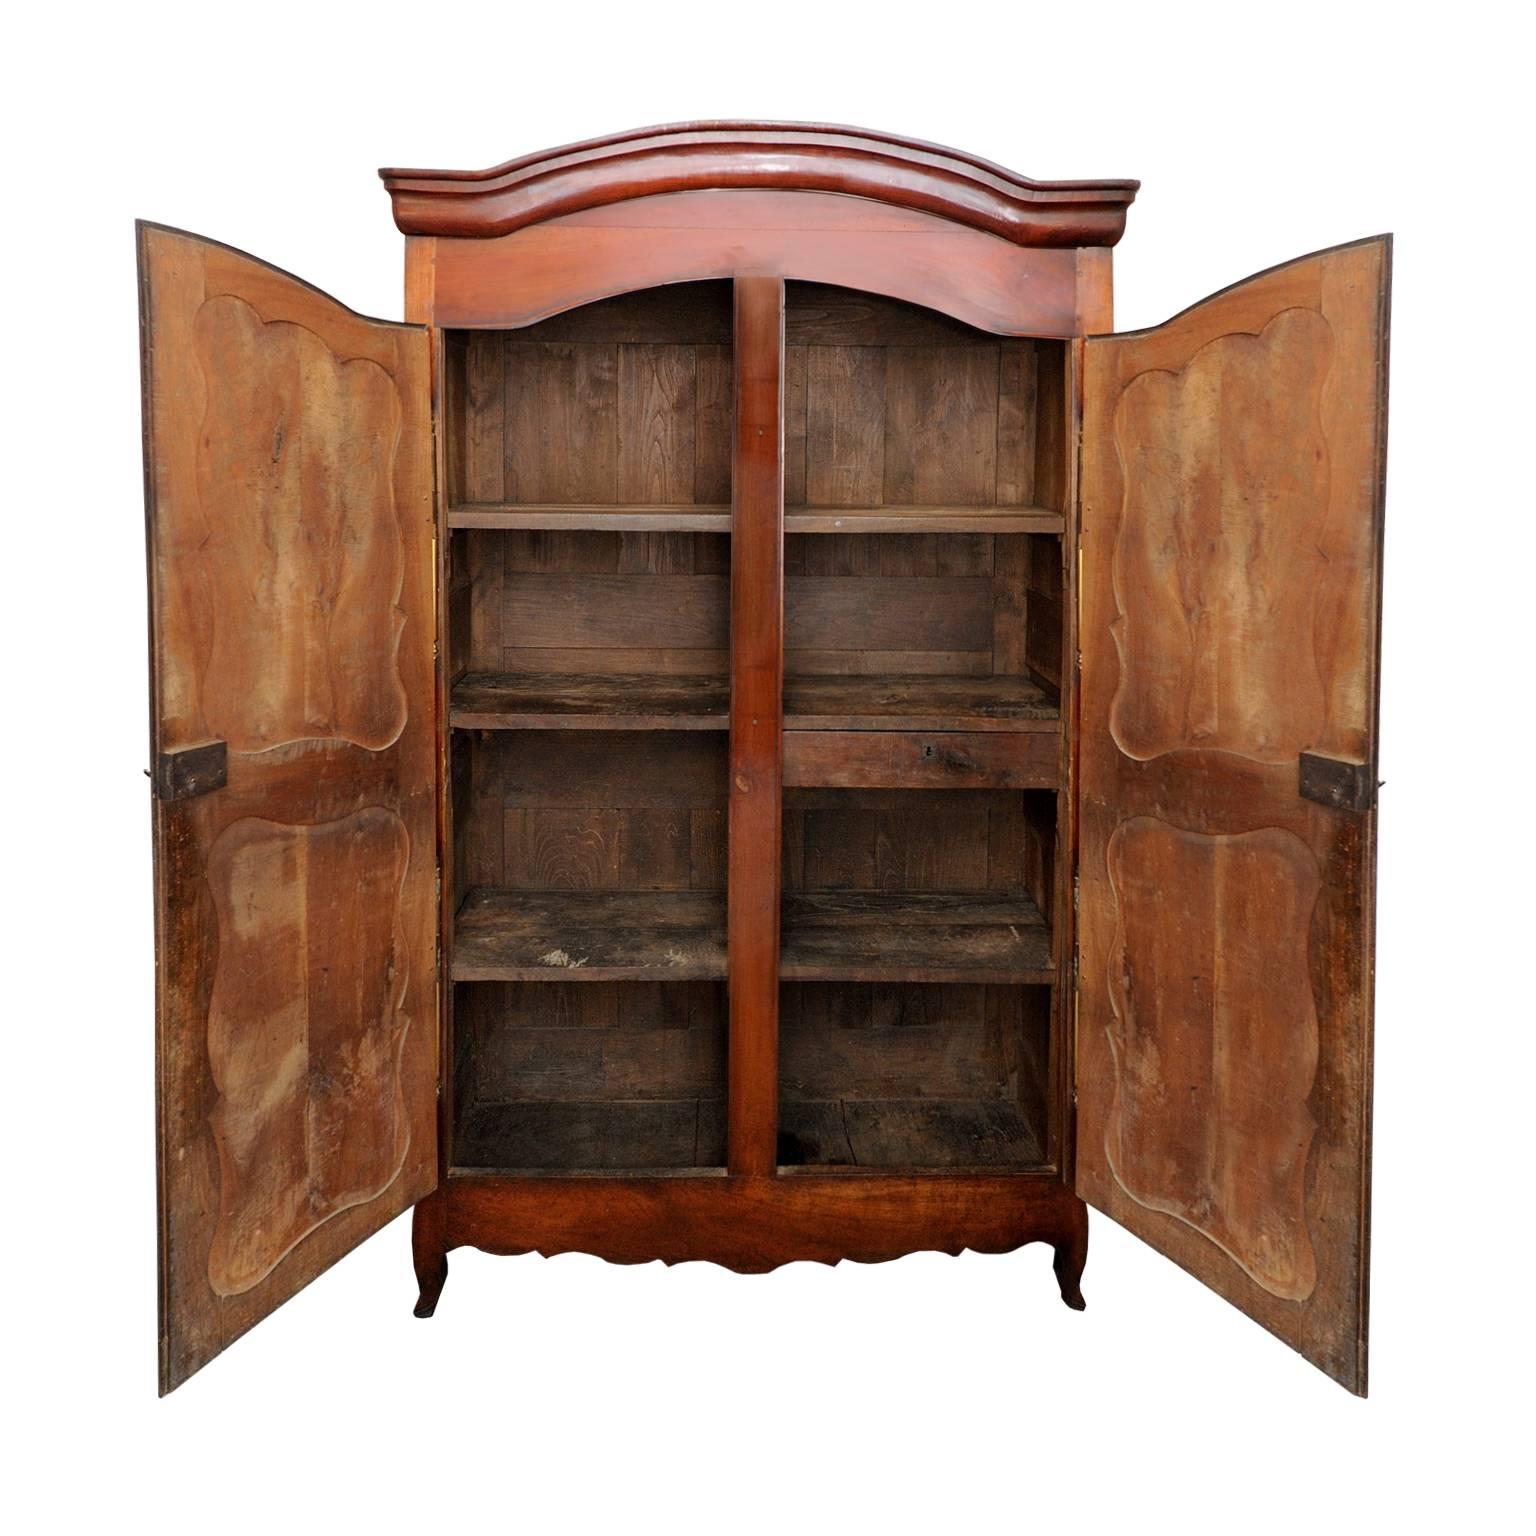 Louis XV Tall French 18th Century Louise xv Cherrywood Armoire Cupboard, circa 1750 For Sale